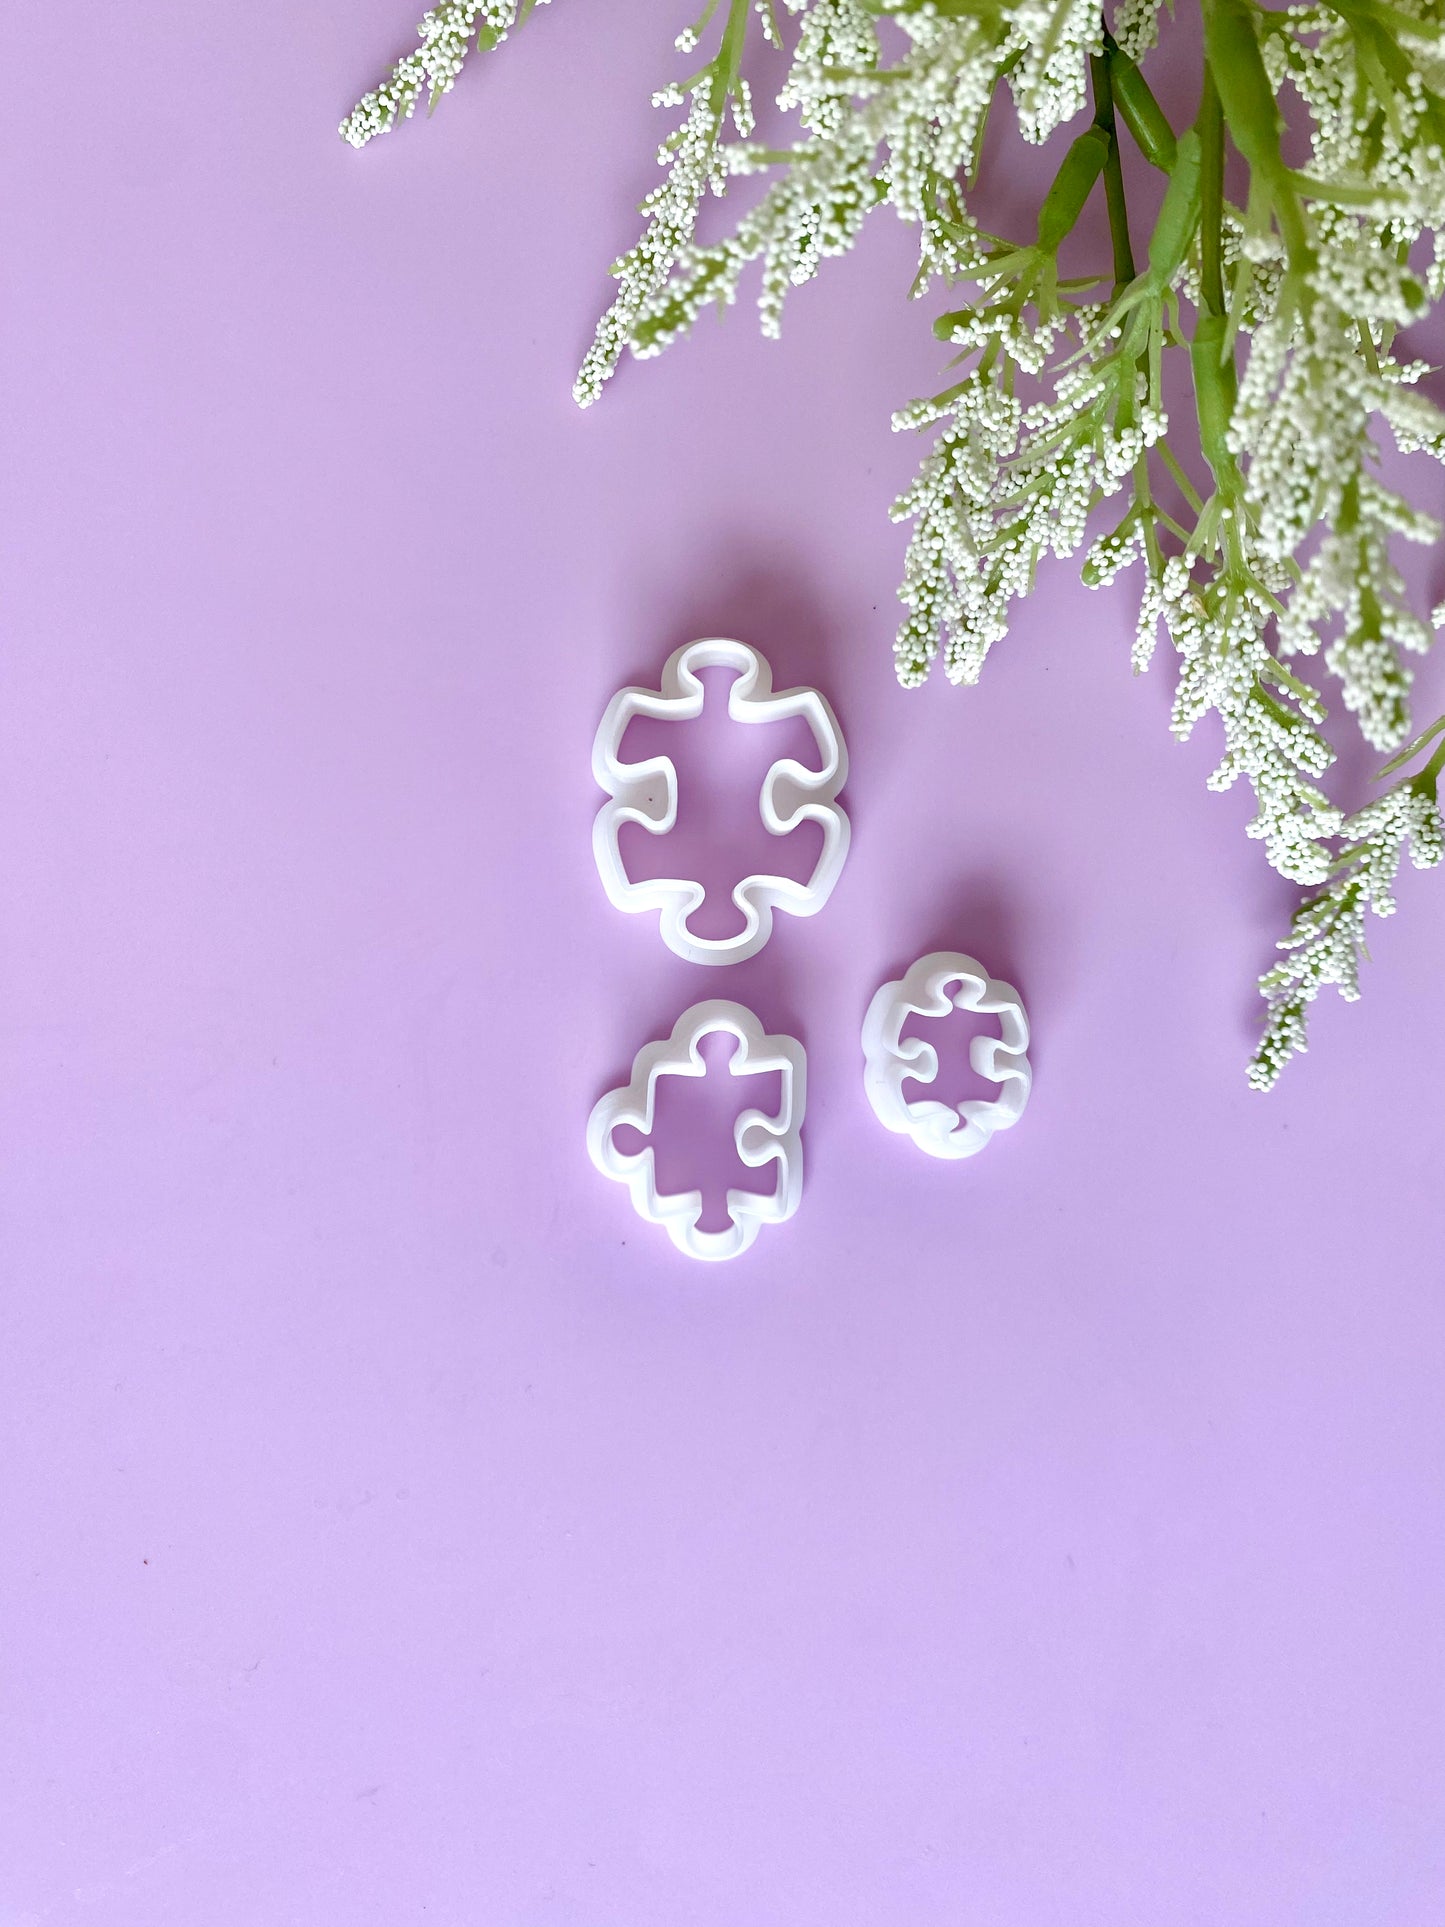 Puzzle Piece - Polymer Clay Cutter Set